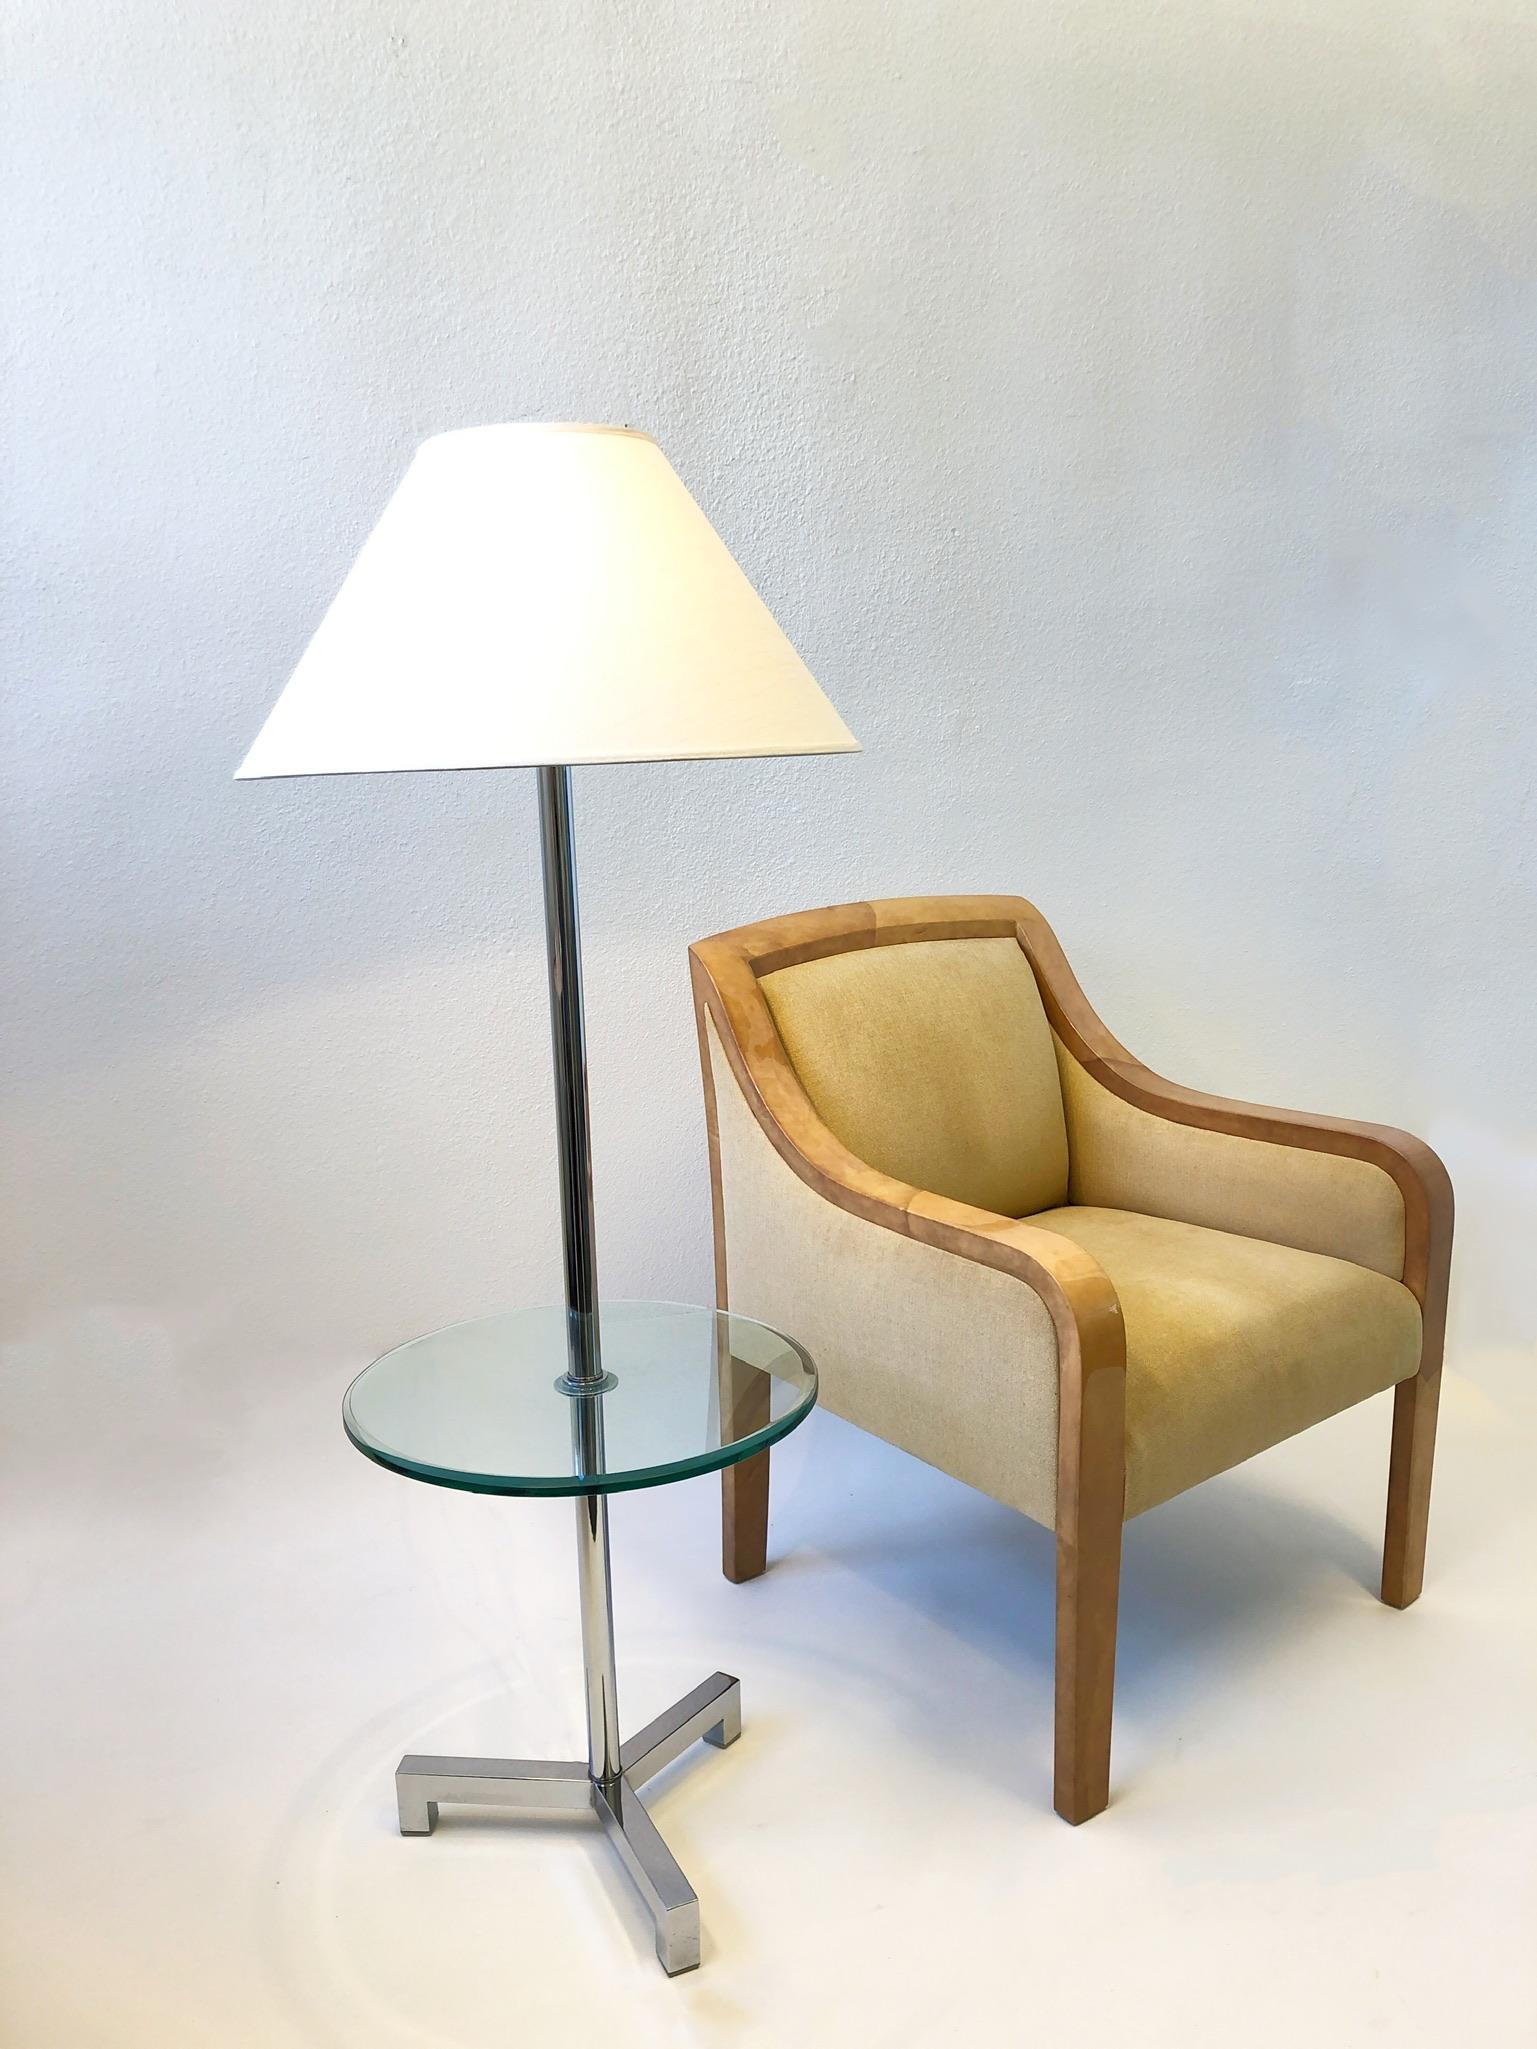 Mid-20th Century Chrome and Glass Floor Lamp with Table by Charles Hollis Jones